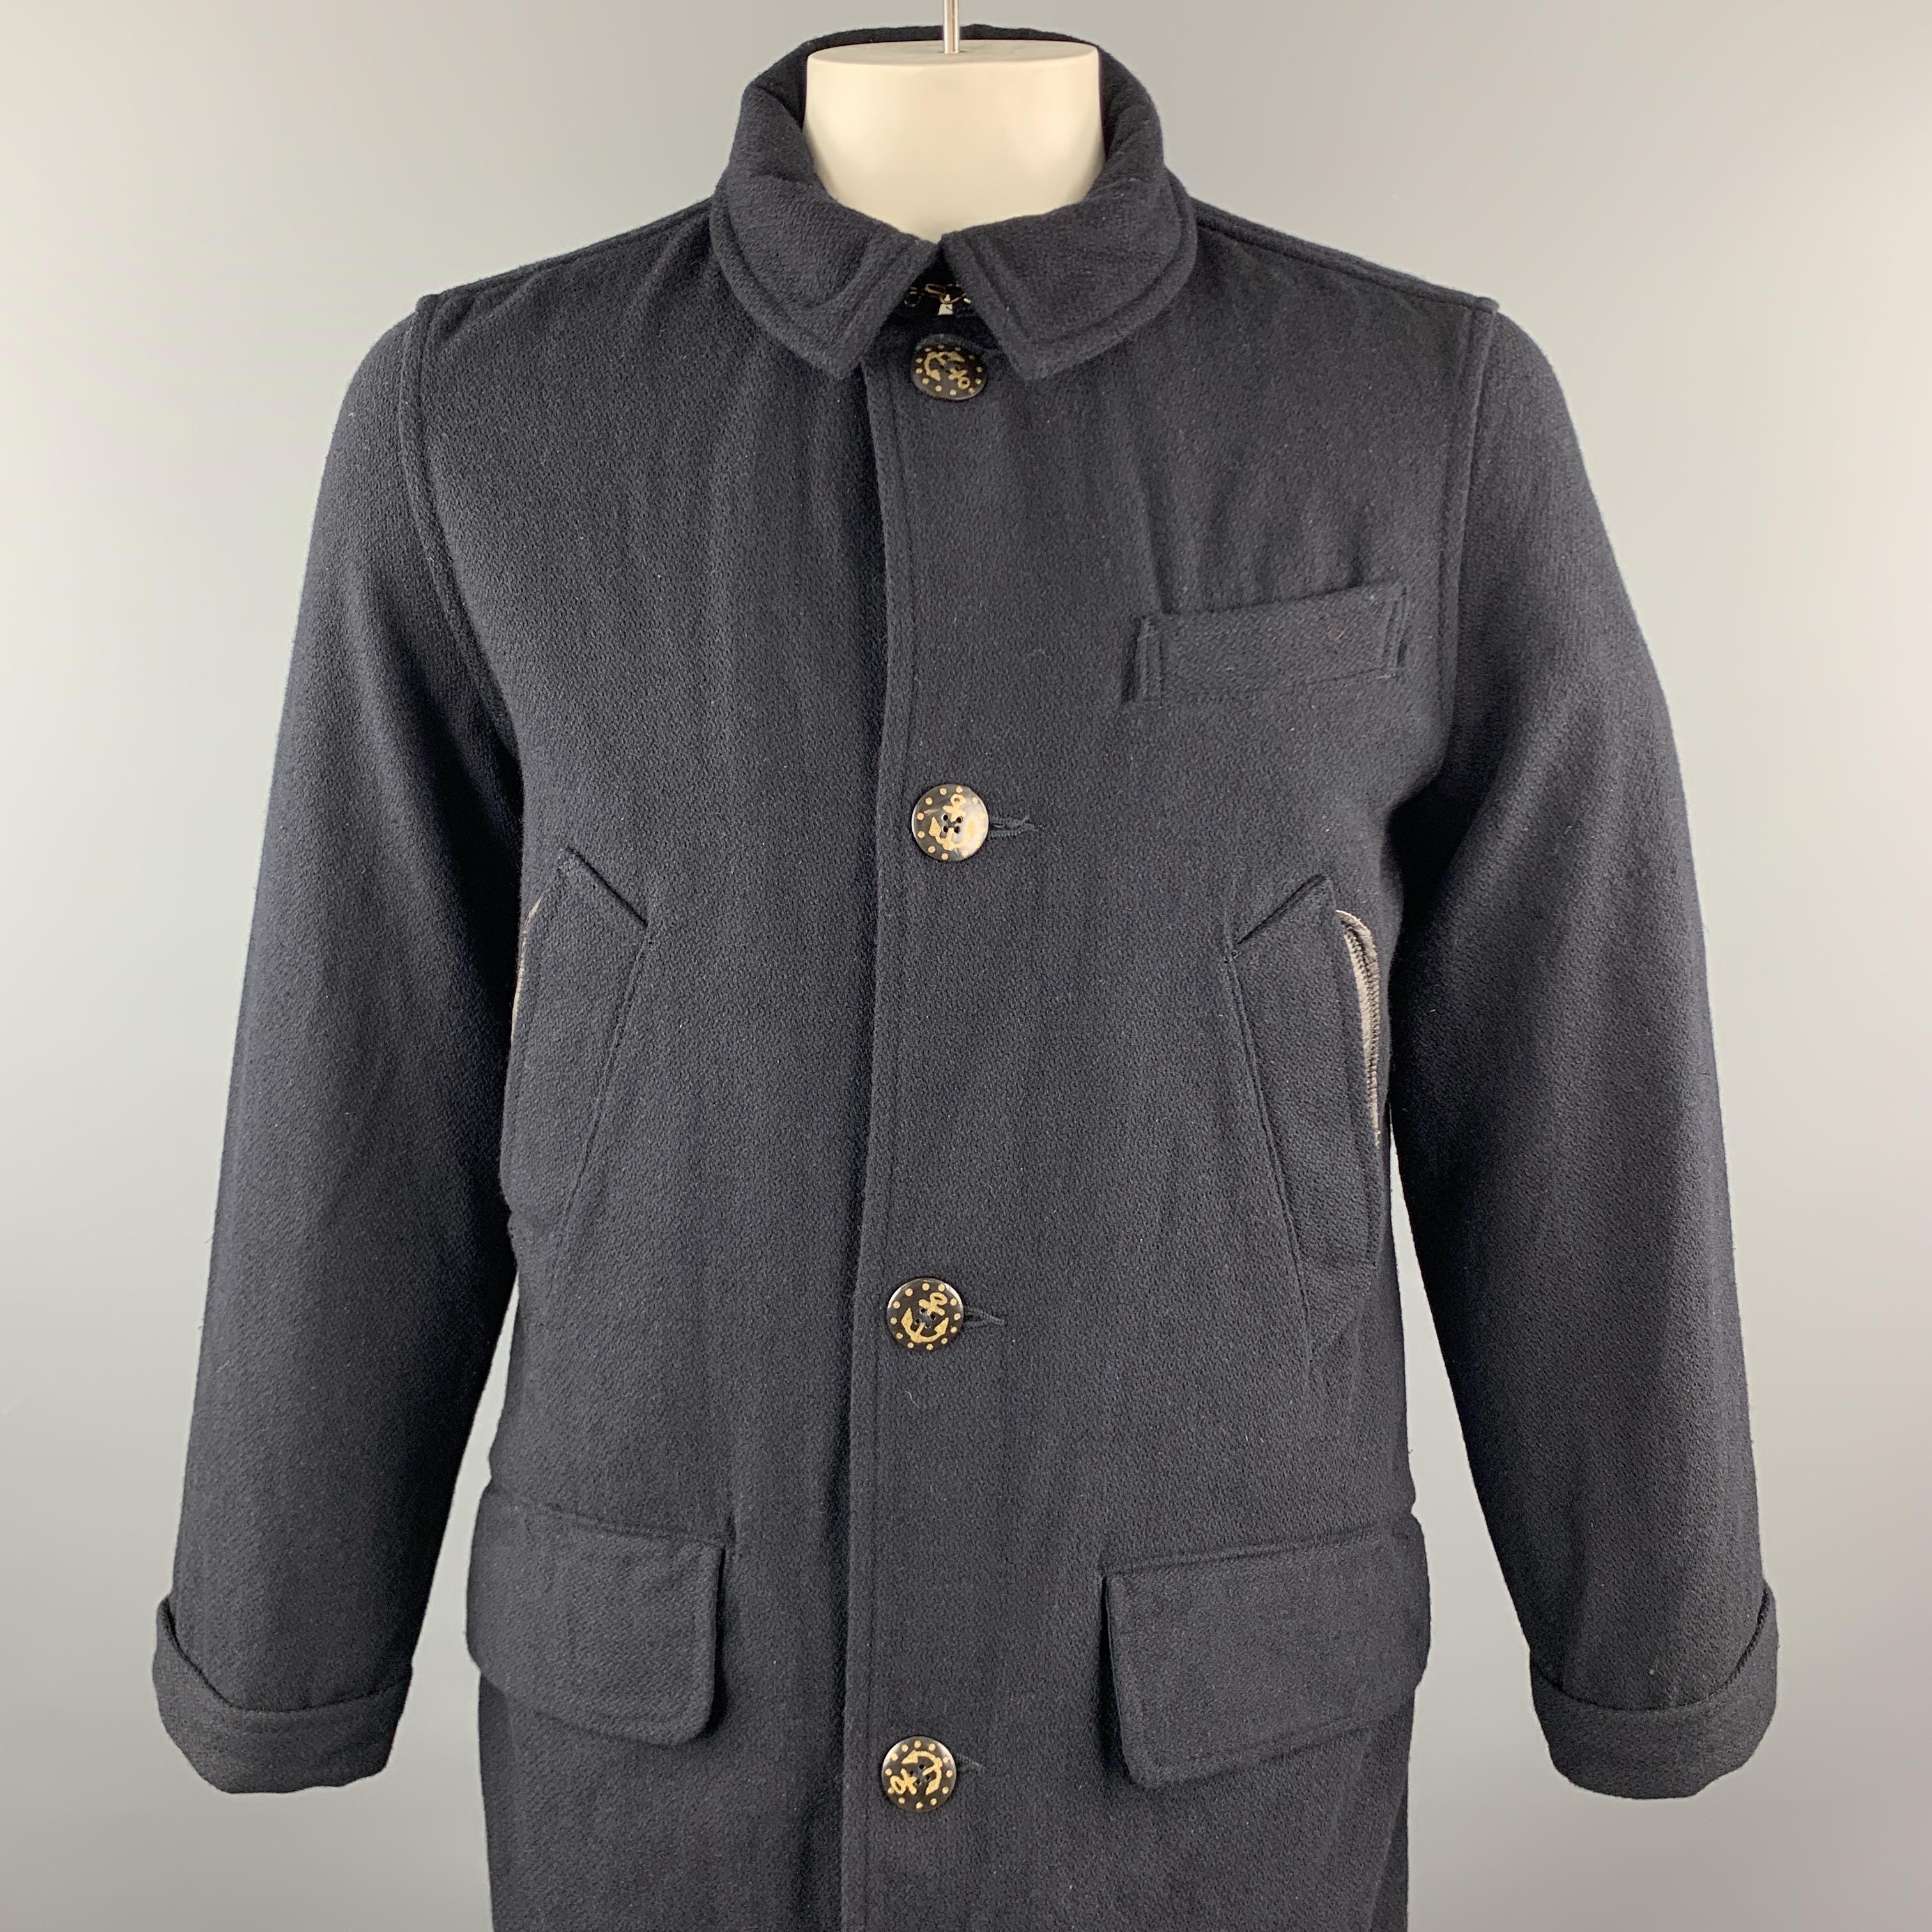 KAPITAL Coat comes in a navy wool / nylon featuring a leather trim detail, flap pockets, and a button closure. Made in Japan.

New With Tags.
Marked: 4
Original Retail Price: $986.00

Measurements:

Shoulder: 18 in.
Chest: 46 in.
Sleeve: 26.5 in.